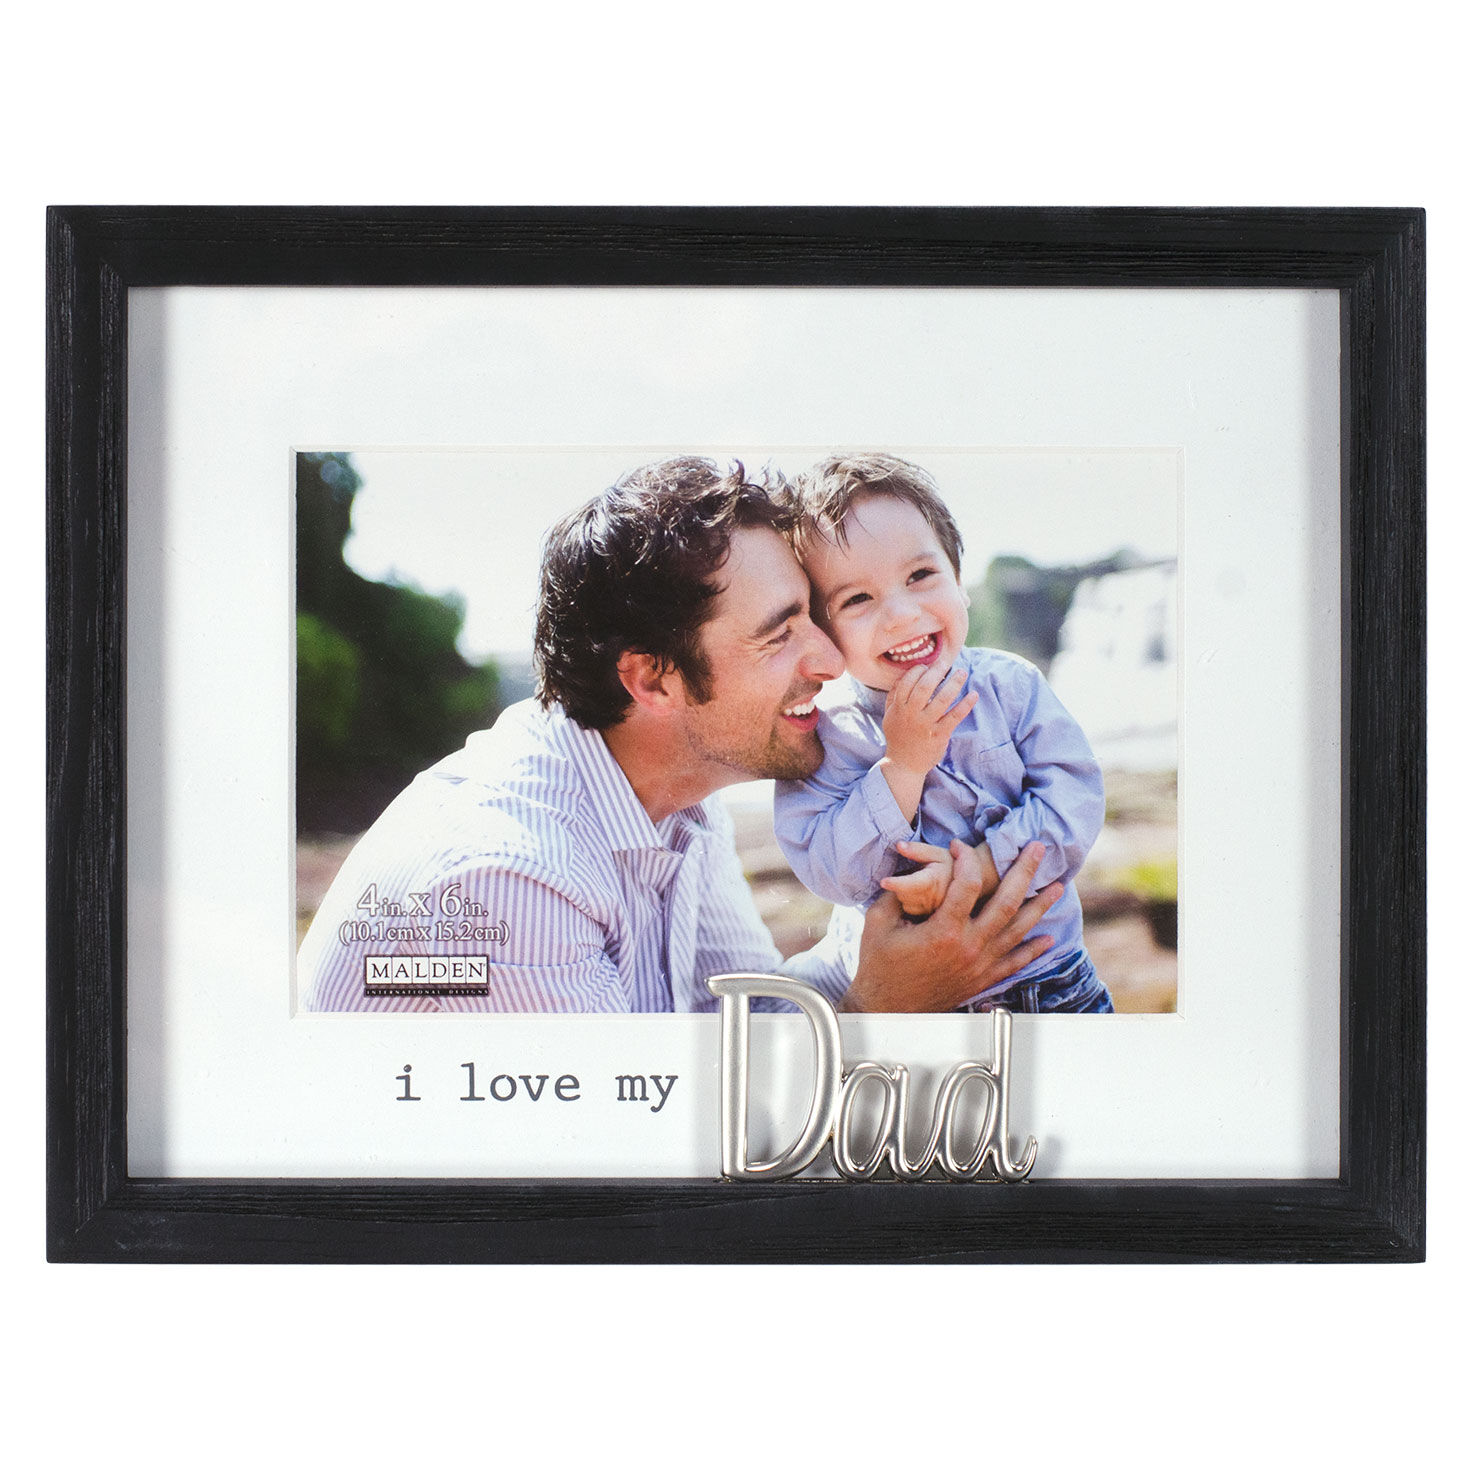 Malden I Love My Dad Picture Frame, 4x6 for only USD 17.99 | Hallmark